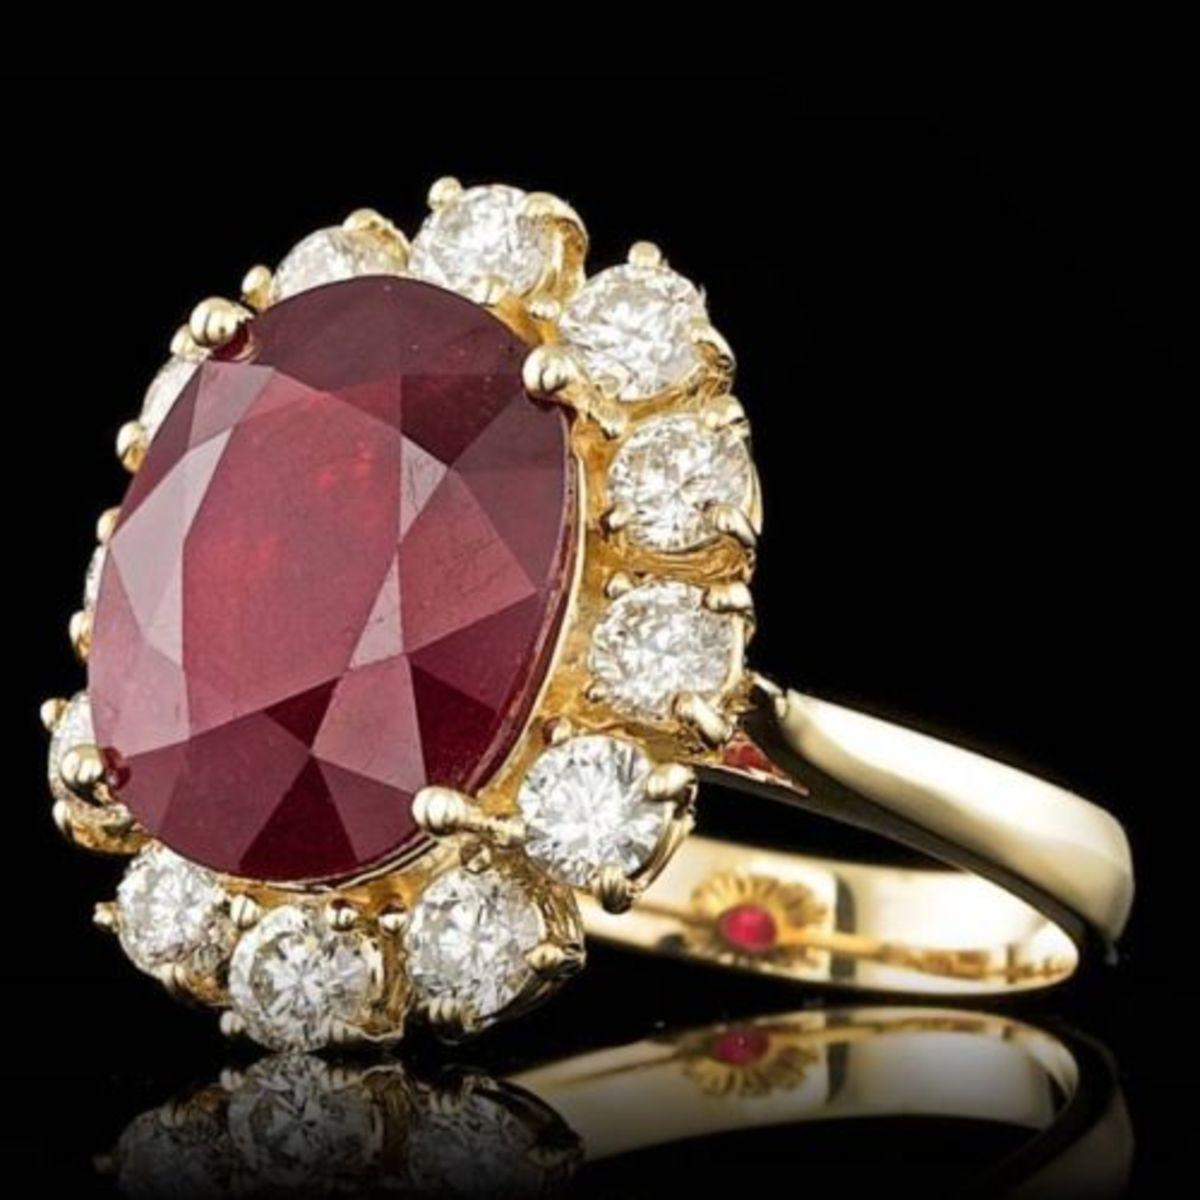 14K Yellow Gold 8.72ct Ruby and 1.68ct Diamond Ring